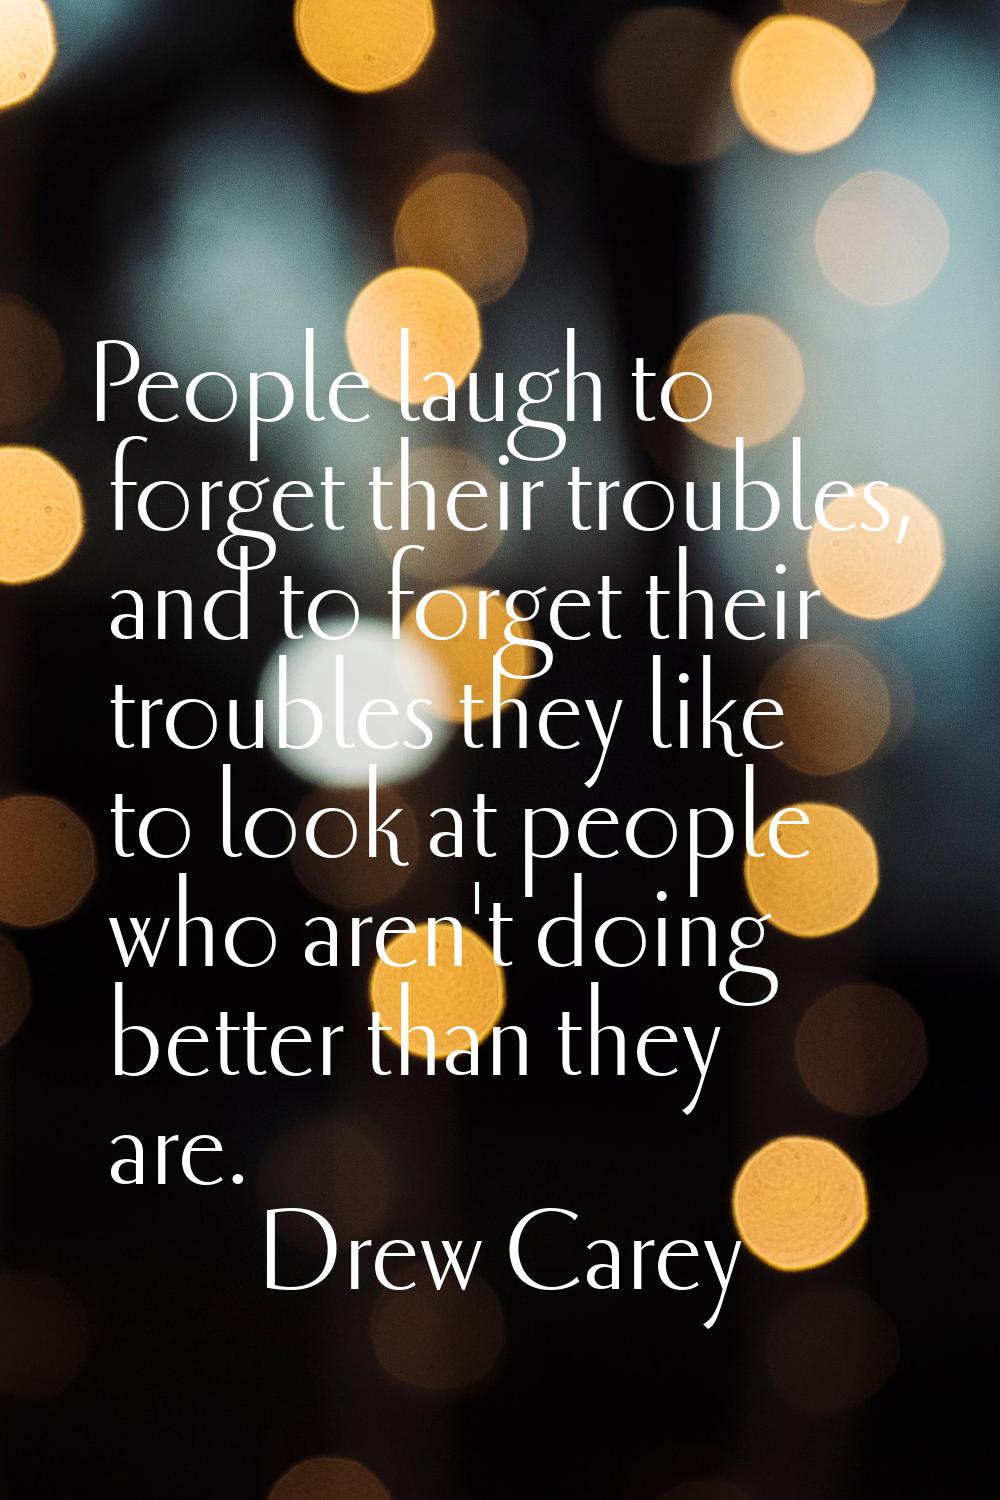 People laugh to forget their troubles, and to forget their troubles they like to look at people who